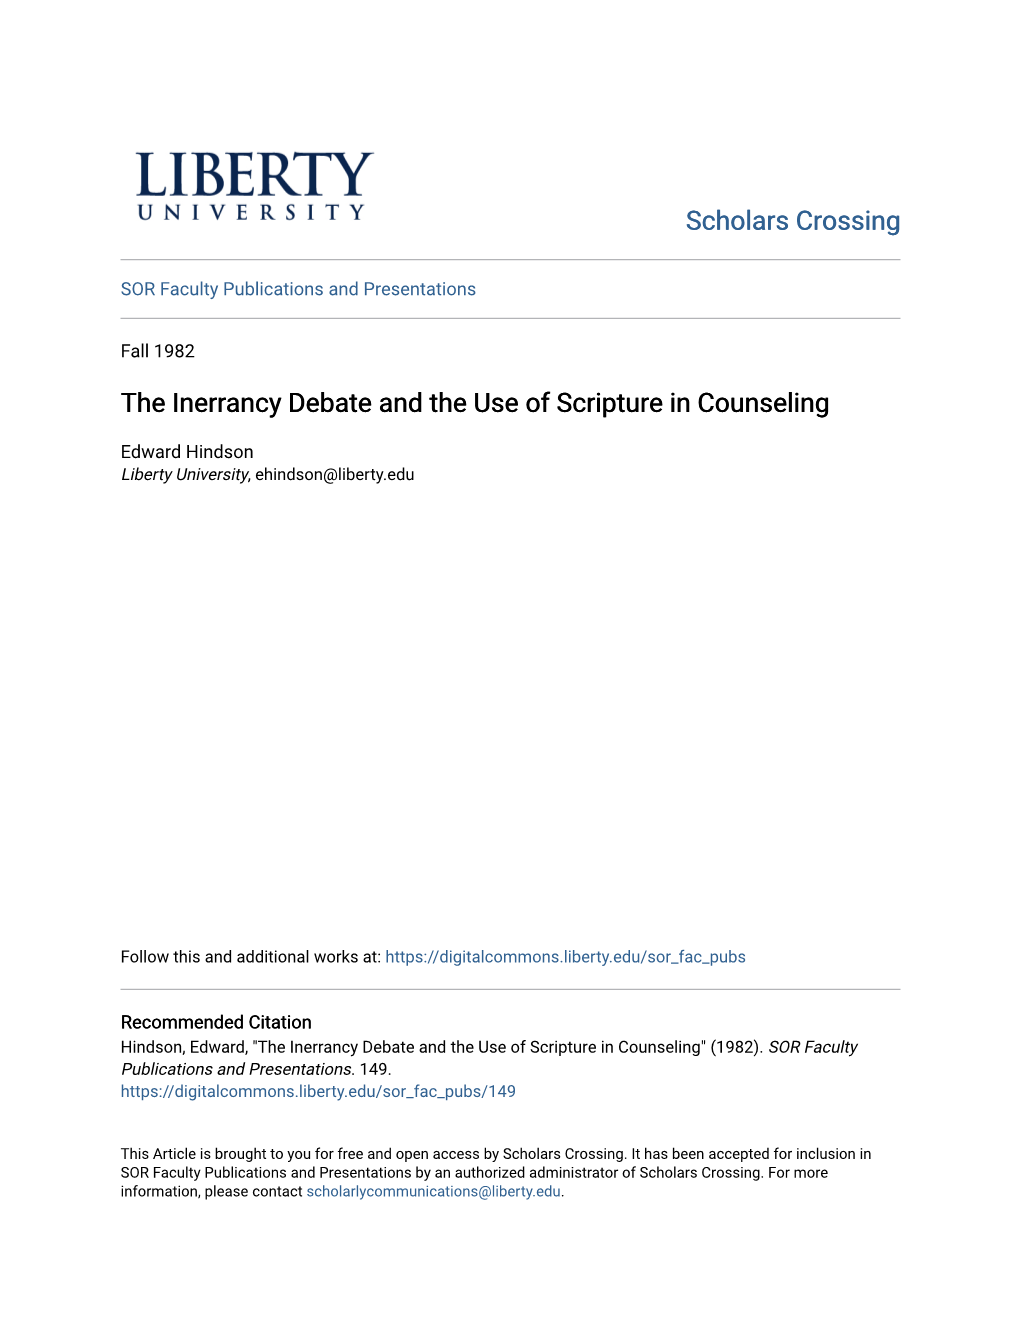 The Inerrancy Debate and the Use of Scripture in Counseling